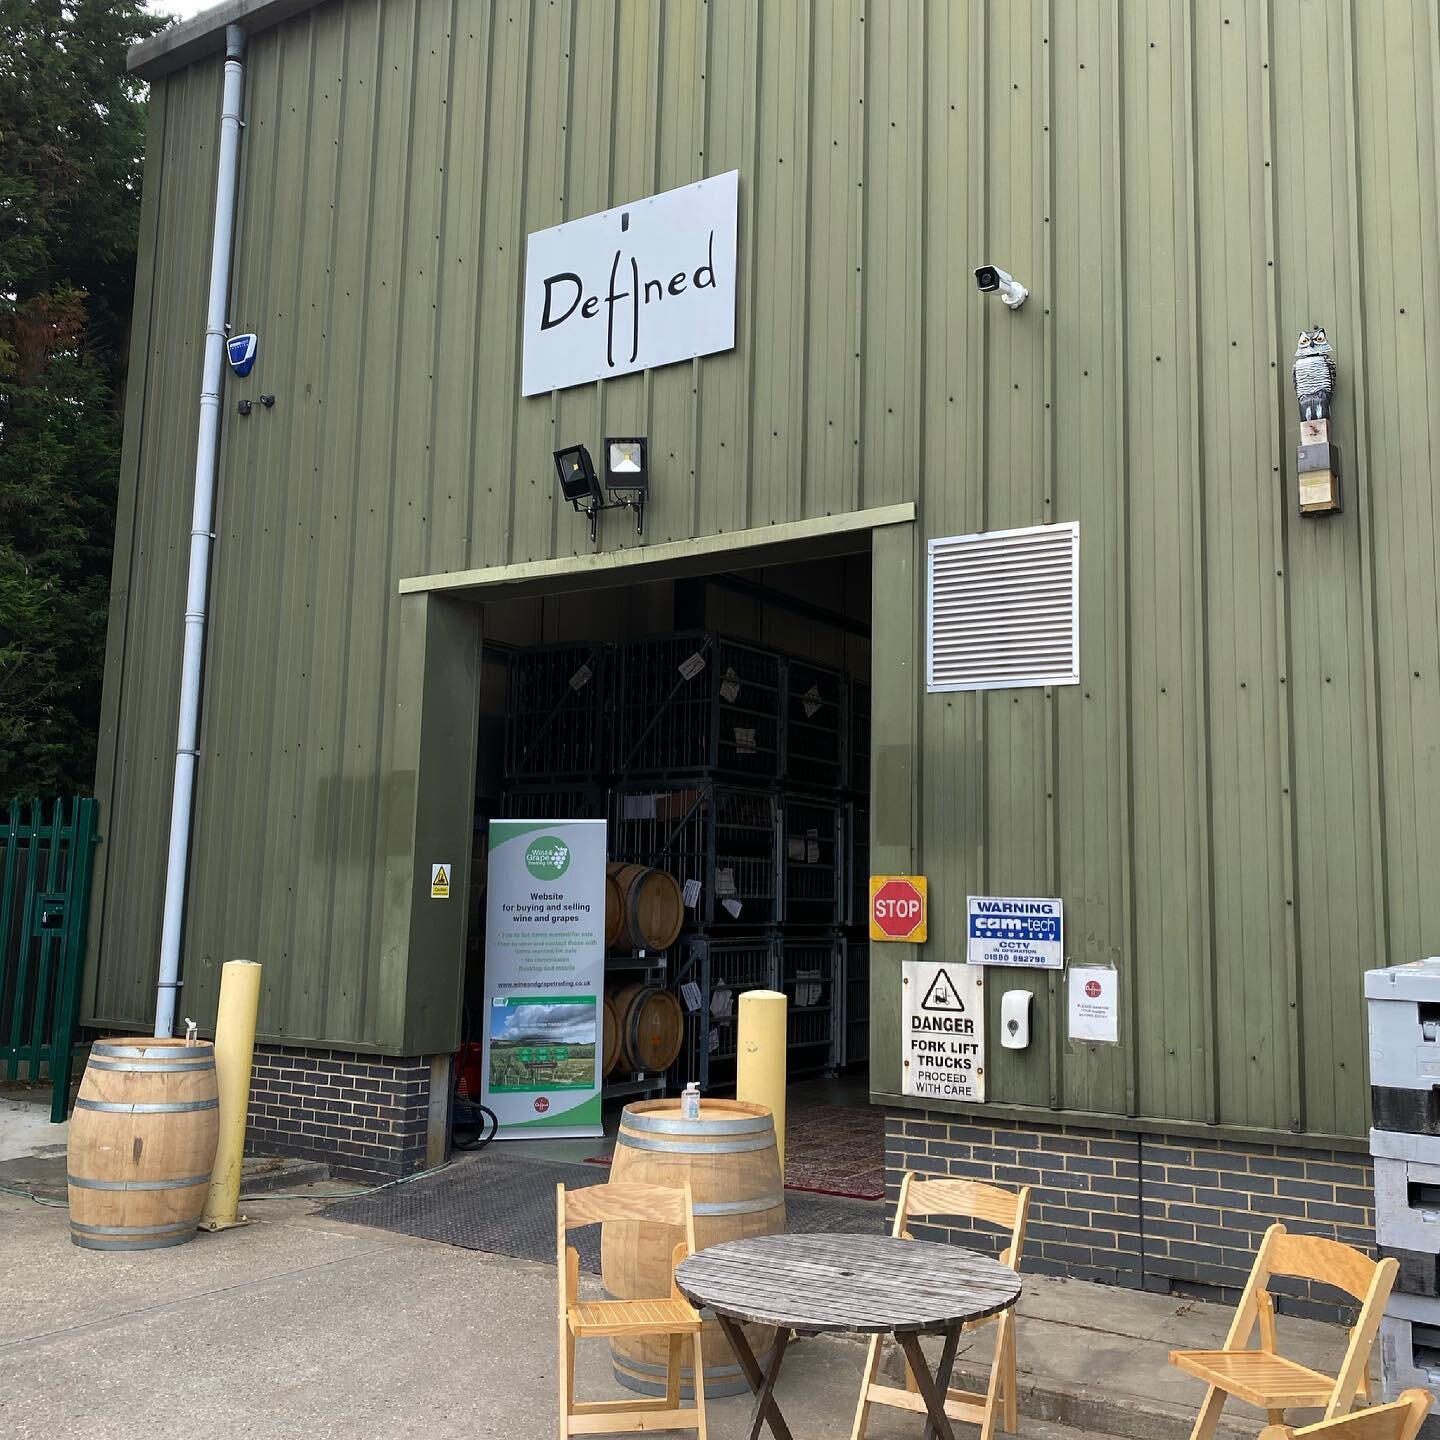 First winery visit in a very long time! Exciting to visit @defined_wine today for their Trade &amp; Press tasting today, and meet them in person! Also great to meet so many other producers, not least our other new client @dillions_vineyard 🥂
.
.
.
.